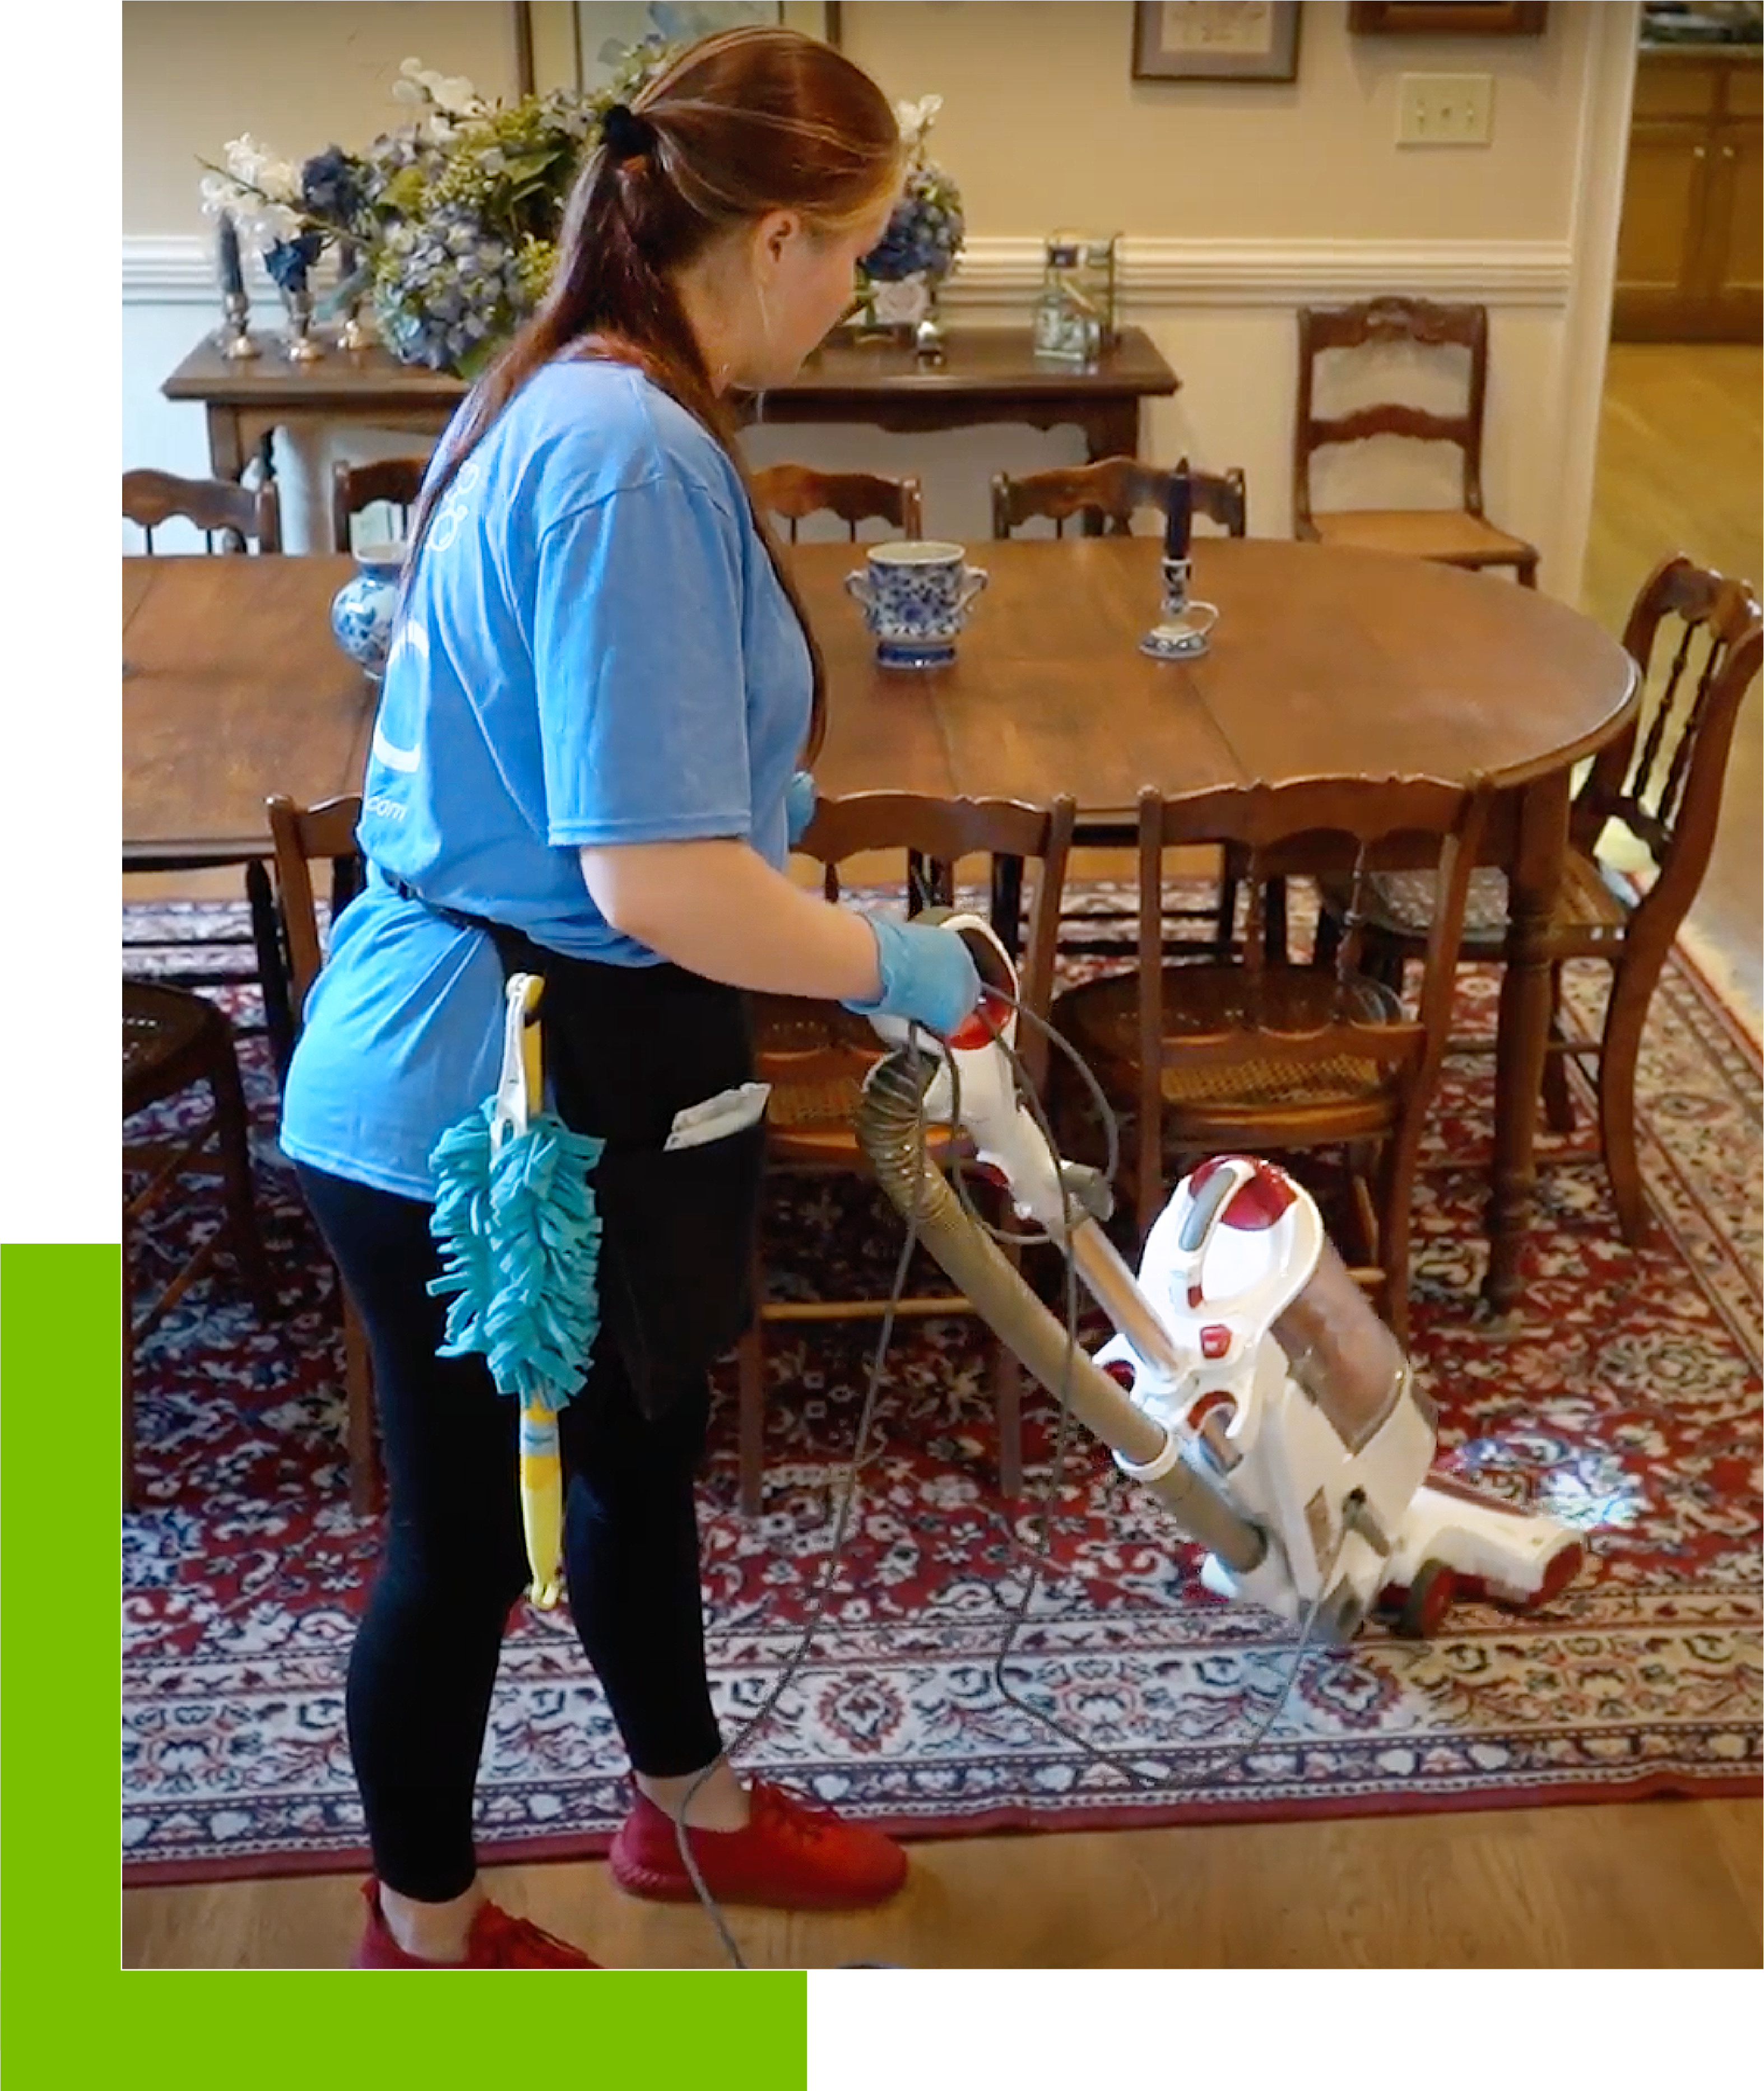 Looking for house cleaning services near me in Stonecrest, GA?